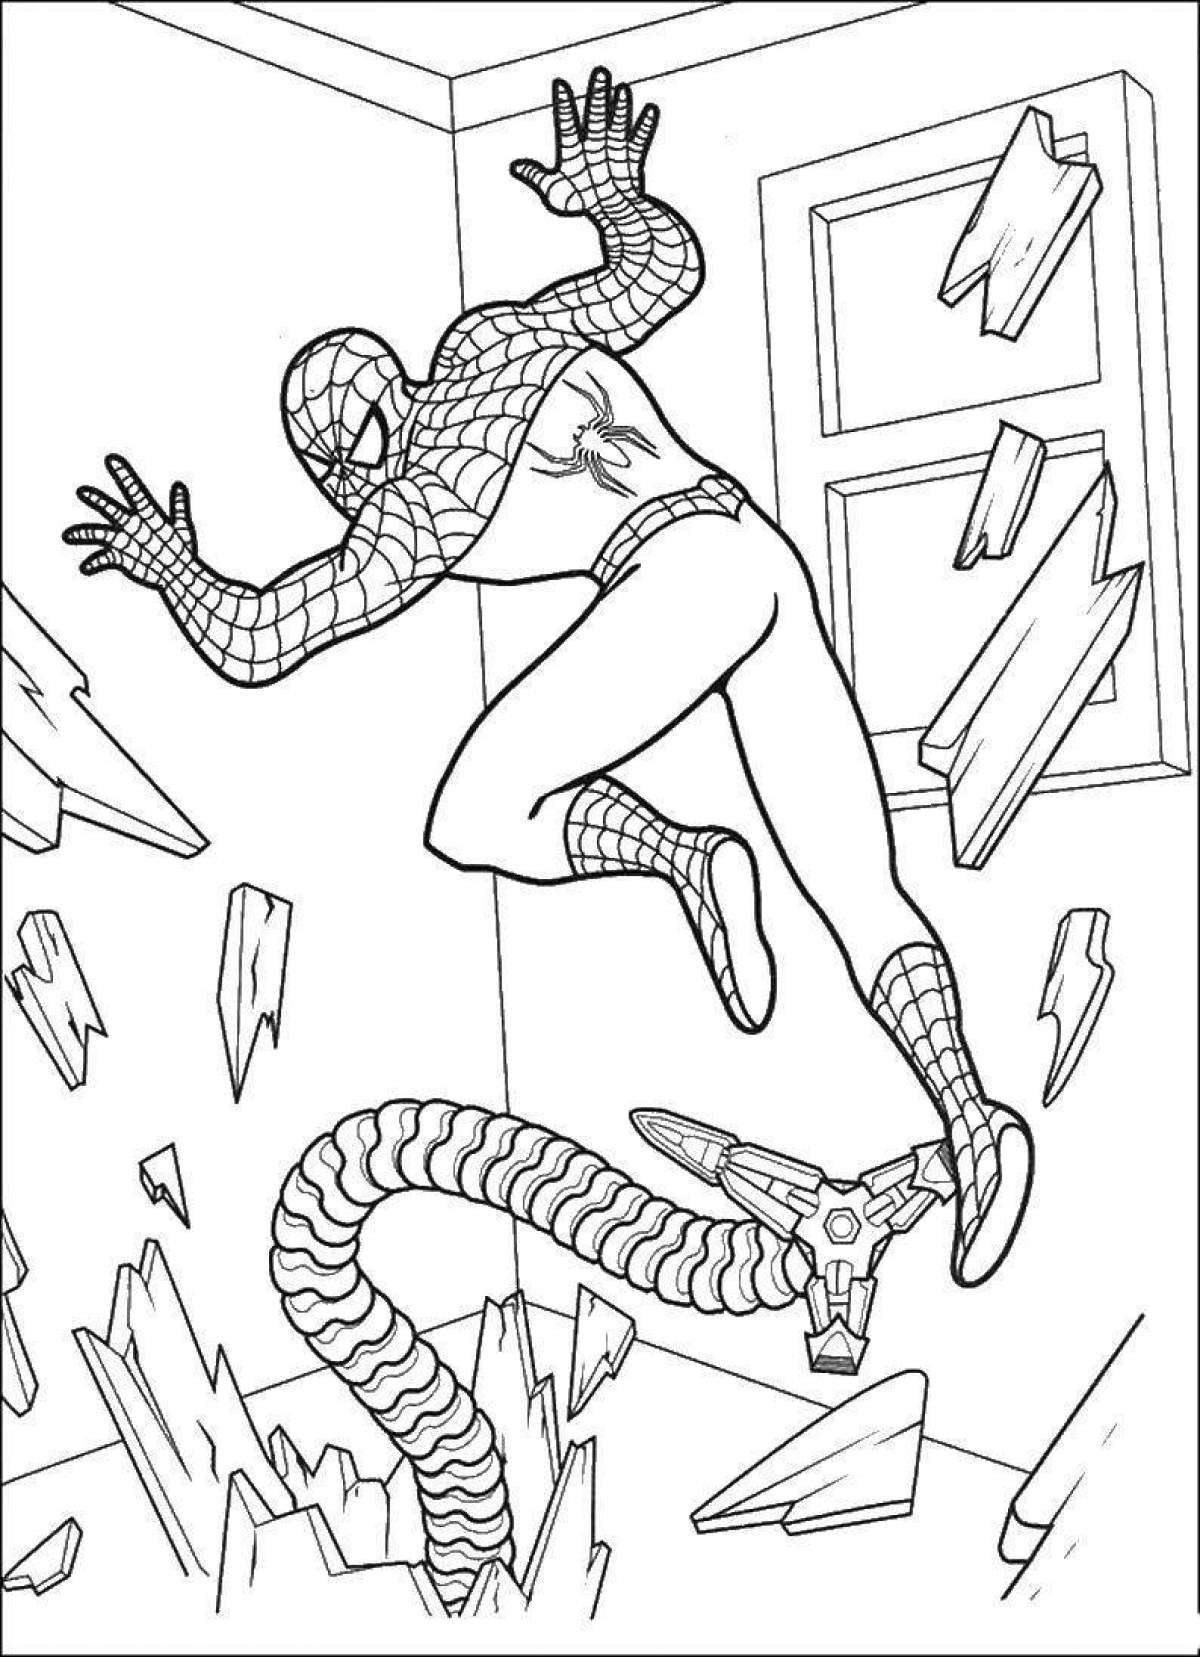 Glowing spider-man coloring book